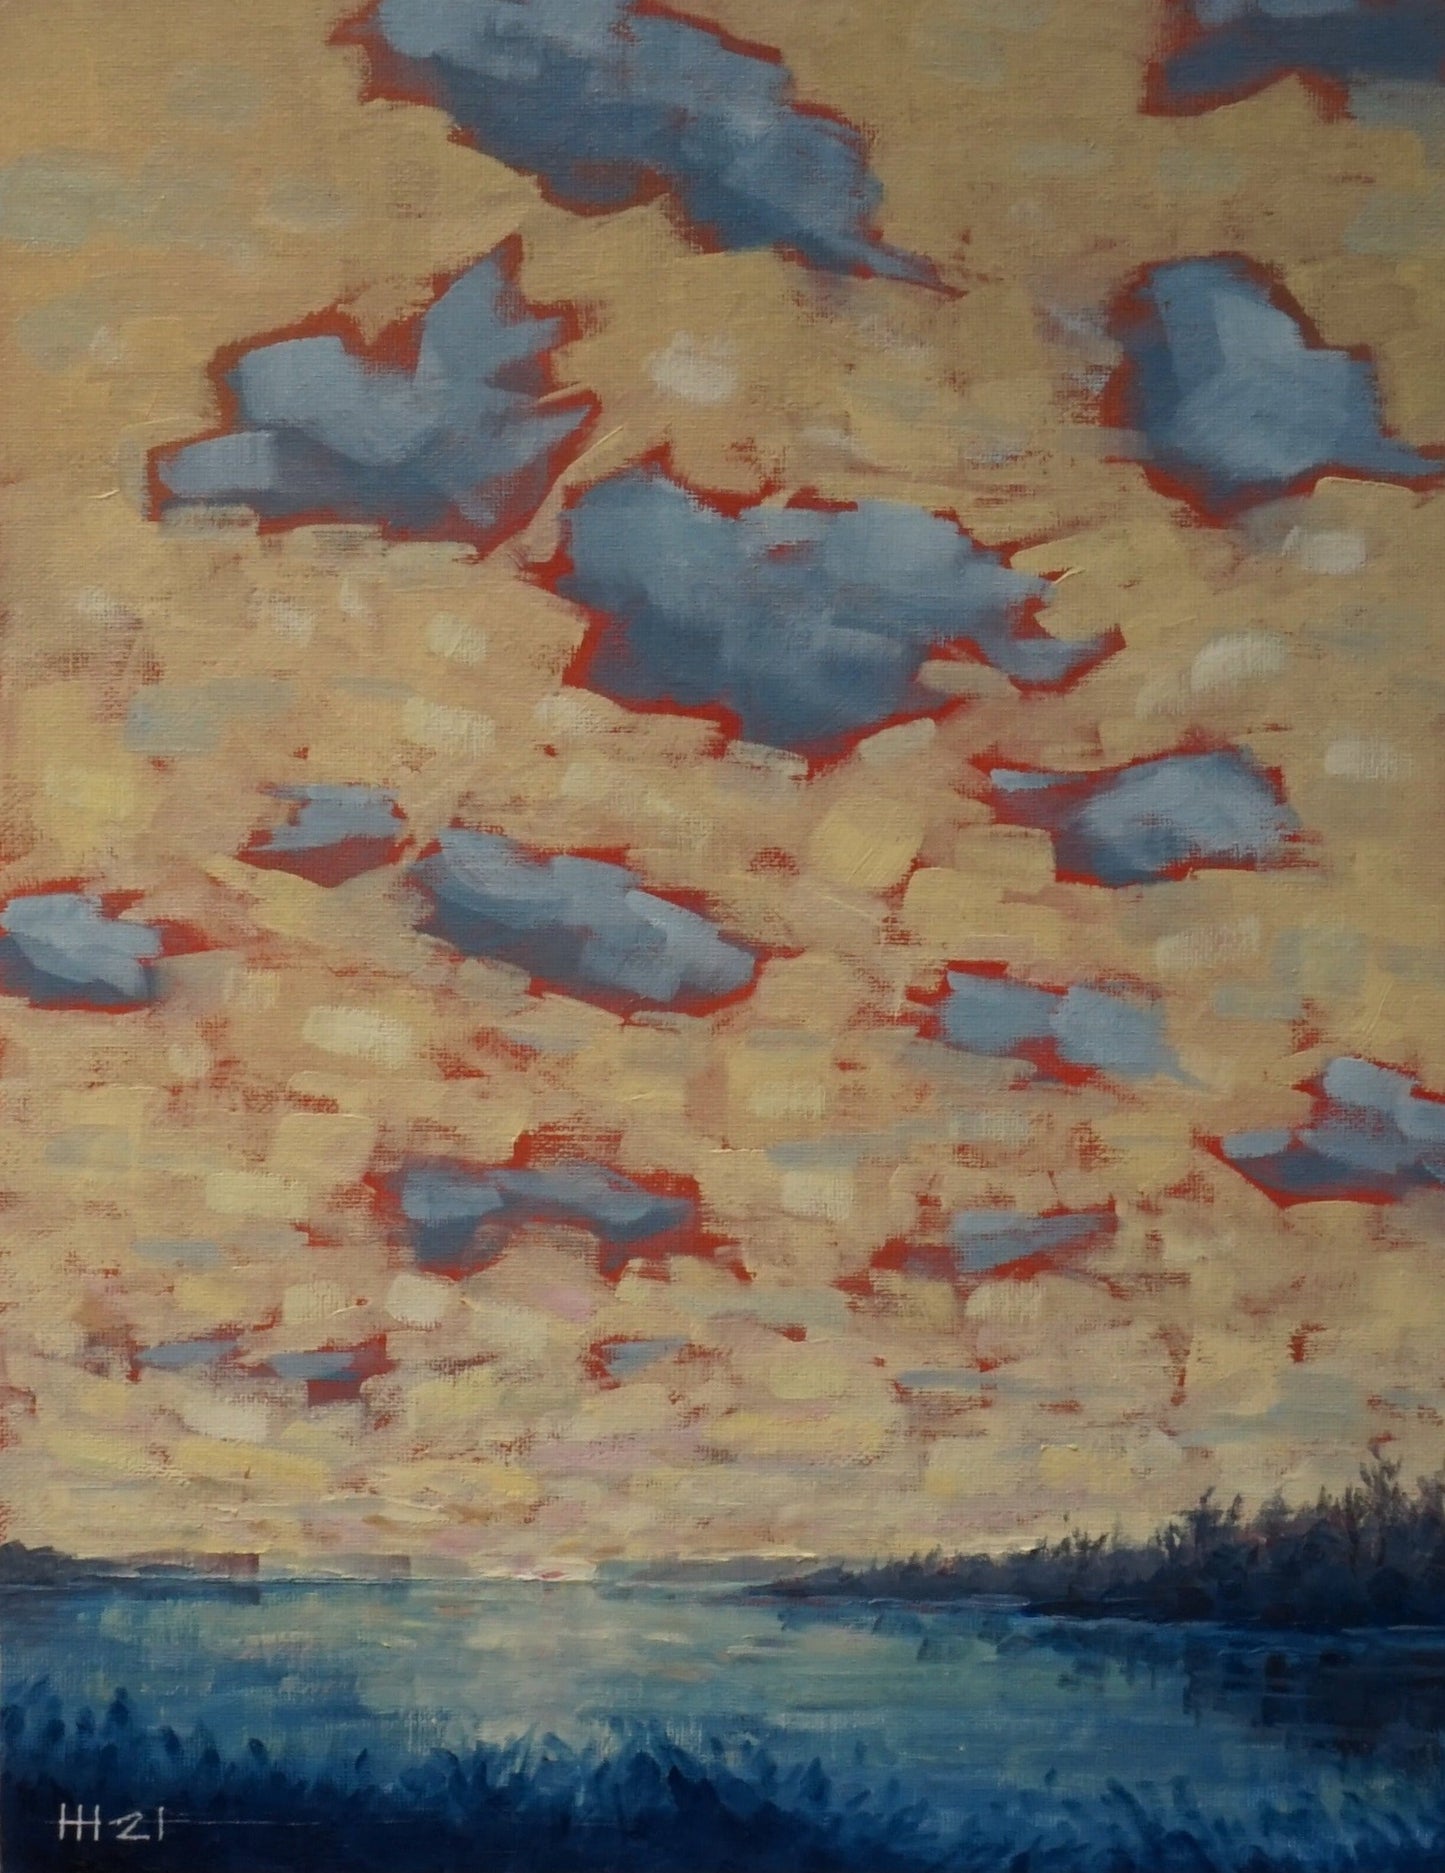 Warm winter sky - 28 x 35.5cm / Oil painting on canvas panel